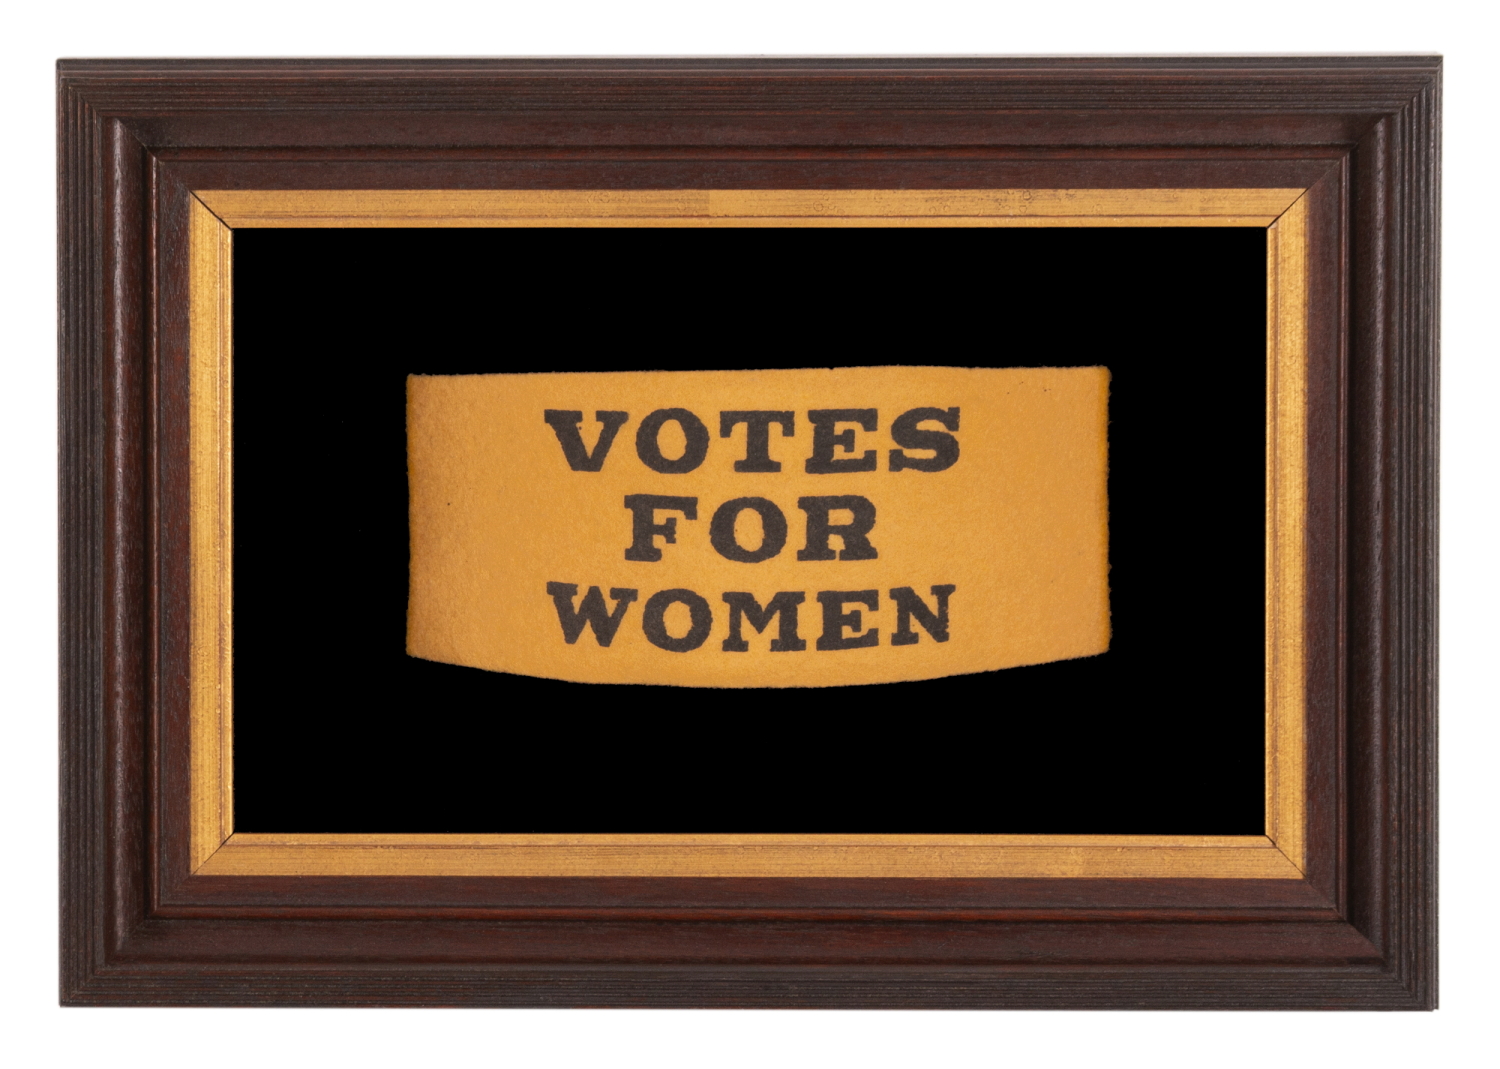 RARE SUFFRAGETTE ARMBAND IN GOLDEN YELLOW FELT, ONE OF ONLY TWO EXAMPLES THAT I HAVE ENCOUNTERED IN THIS COLOR & THE ONLY ONE IN THIS EXACT STYLE; MADE circa 1912-1919